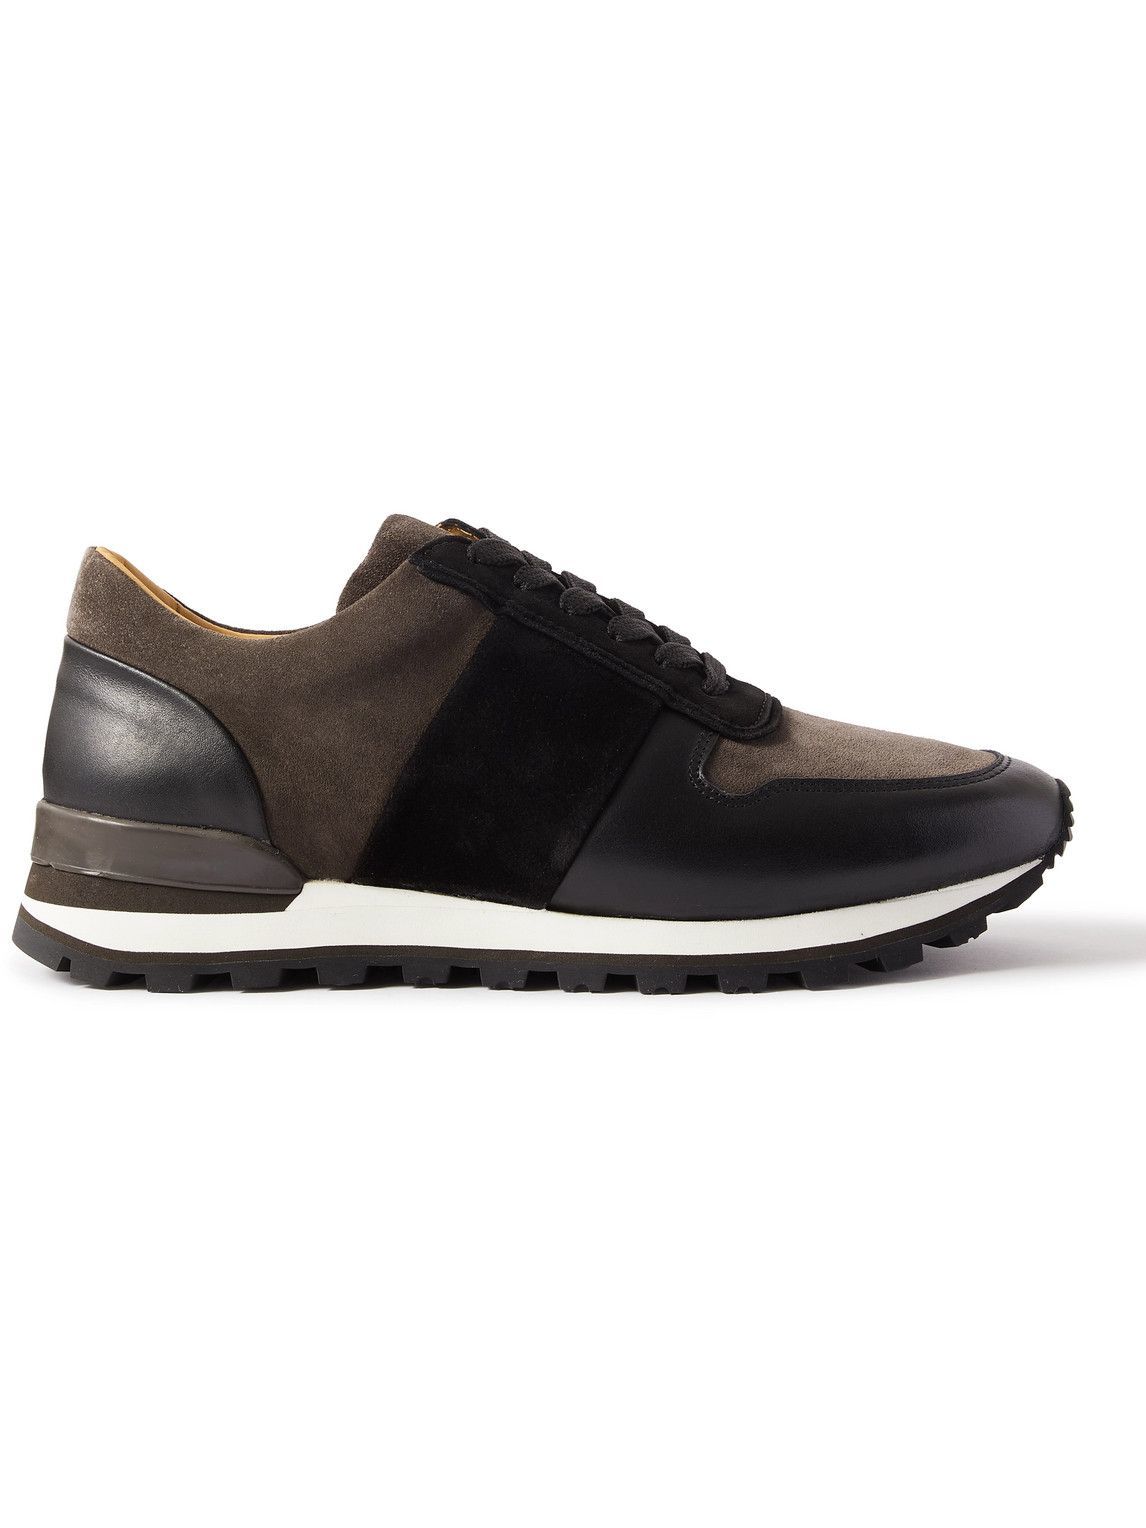 Mr P. - Panelled Suede and Leather Sneakers - Black Mr P.